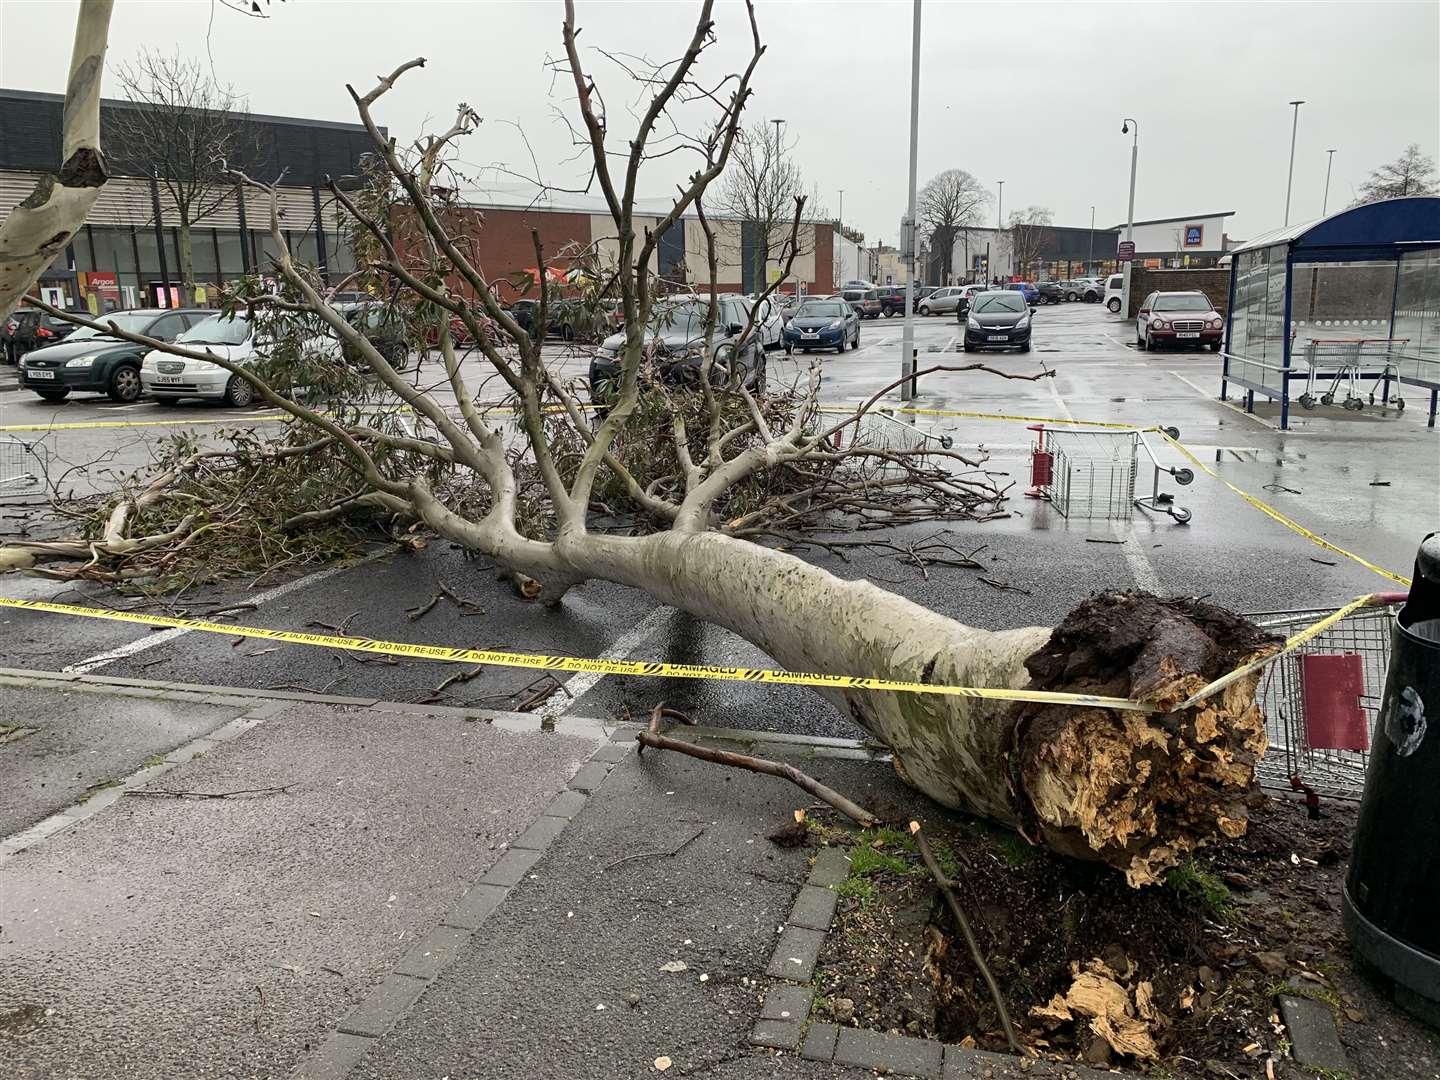 A tree was ripped from the ground in Sainsbury's car park in Deal